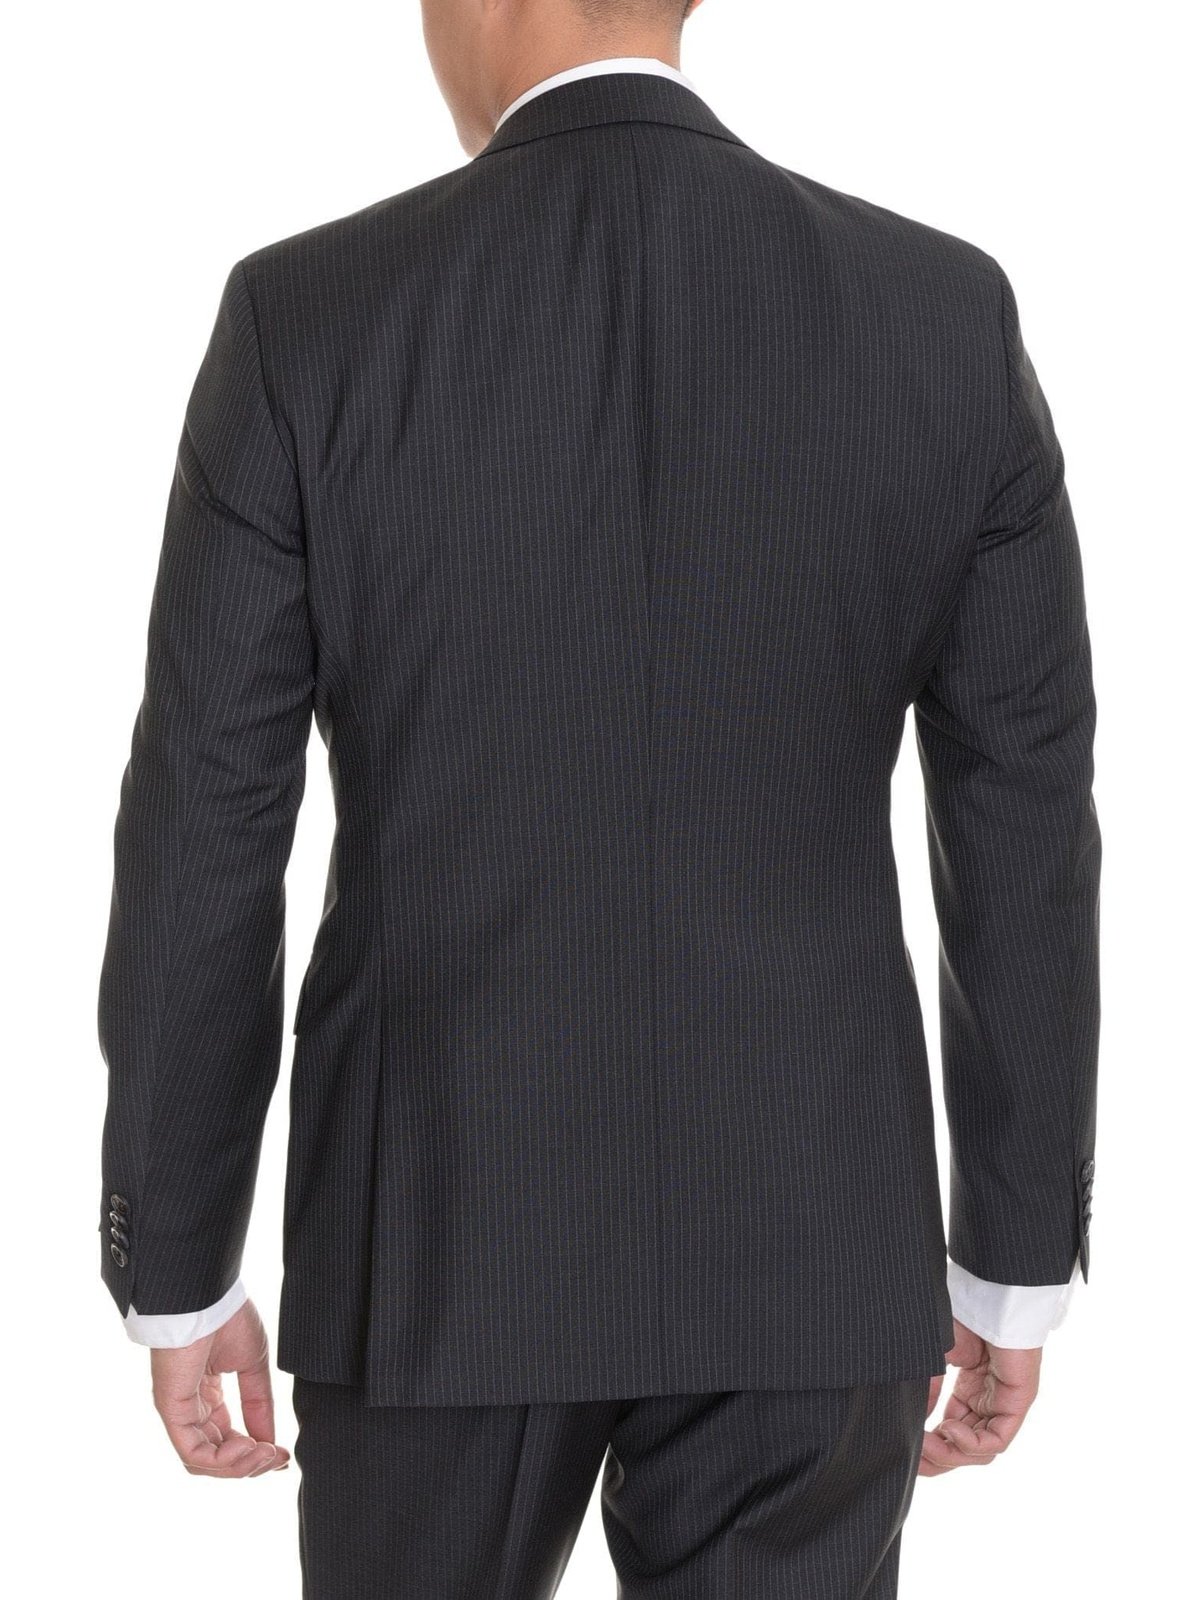 HUGO BOSS TWO PIECE SUITS HUGO BOSS The Grand/Central Charcoal Gray Striped Wool Suit